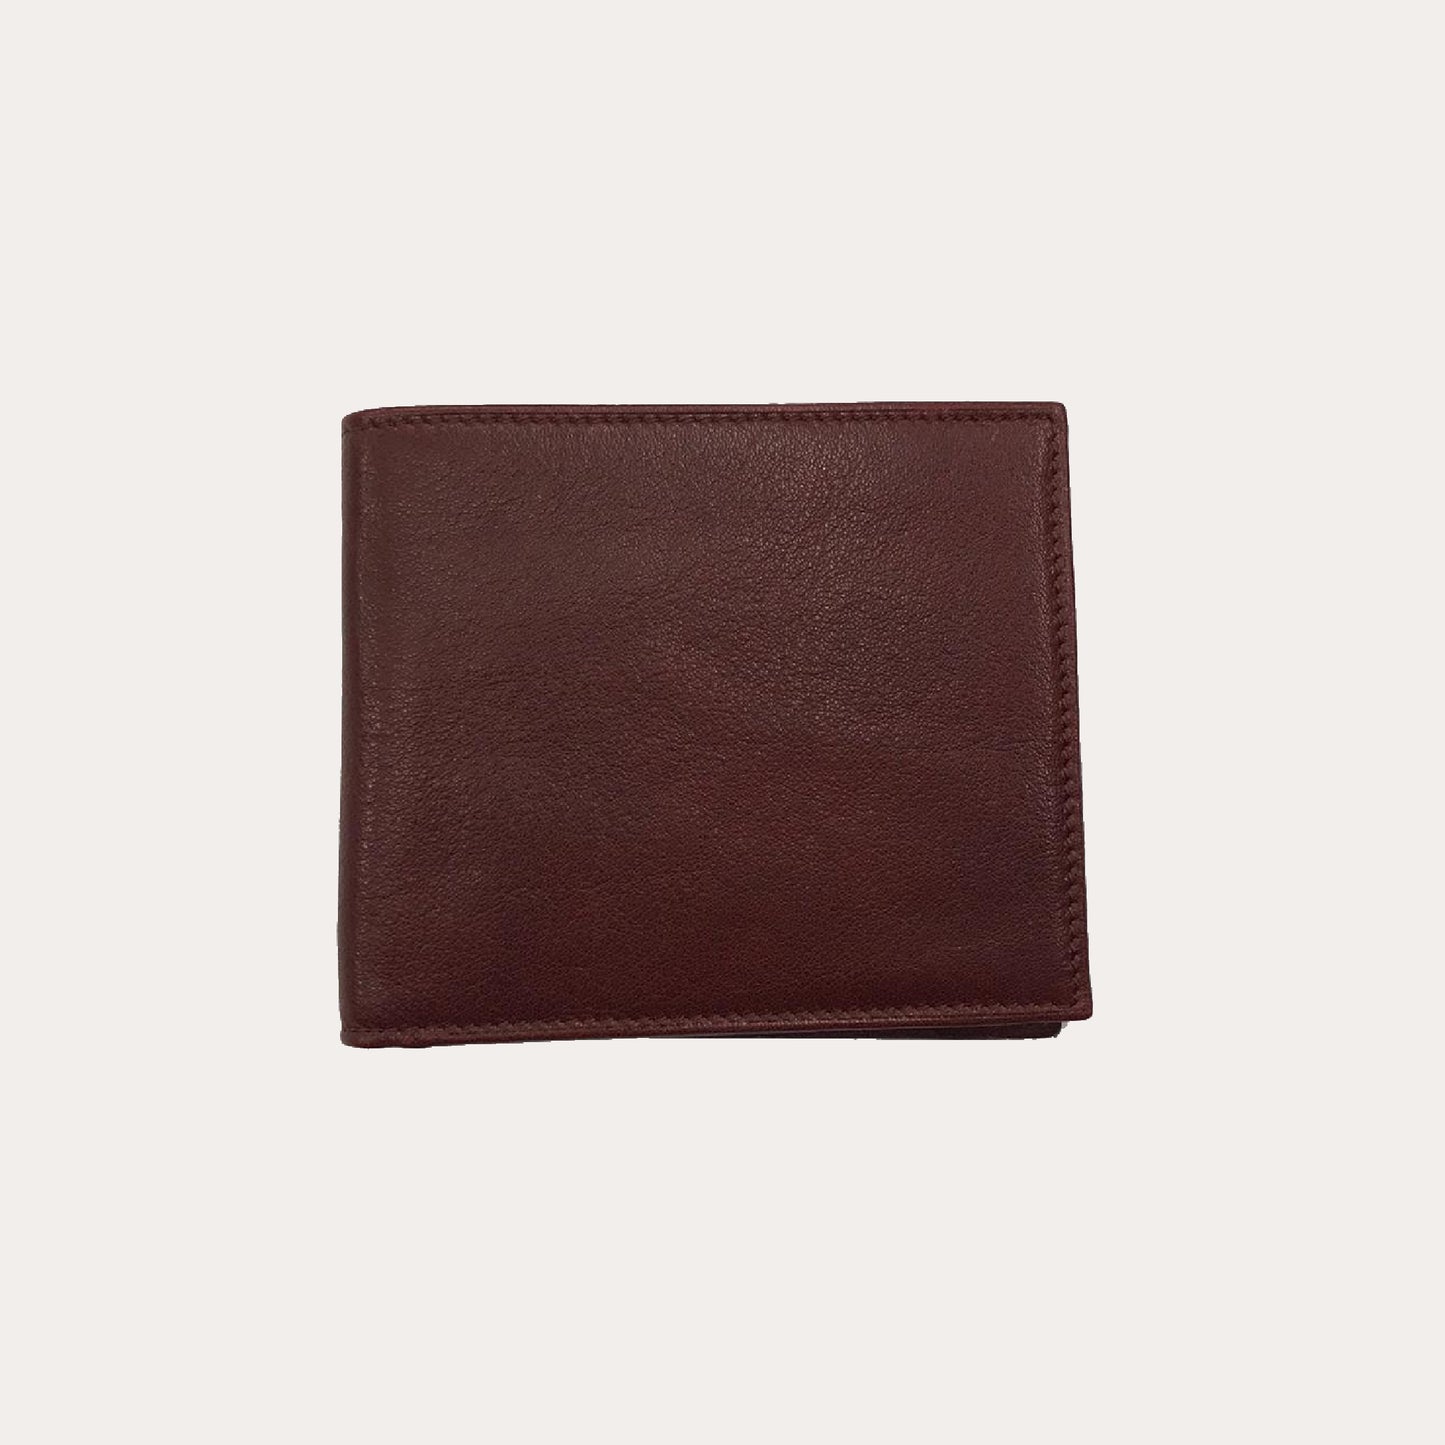 Maroon Vacchetta Leather Wallet-8 Credit Card Section